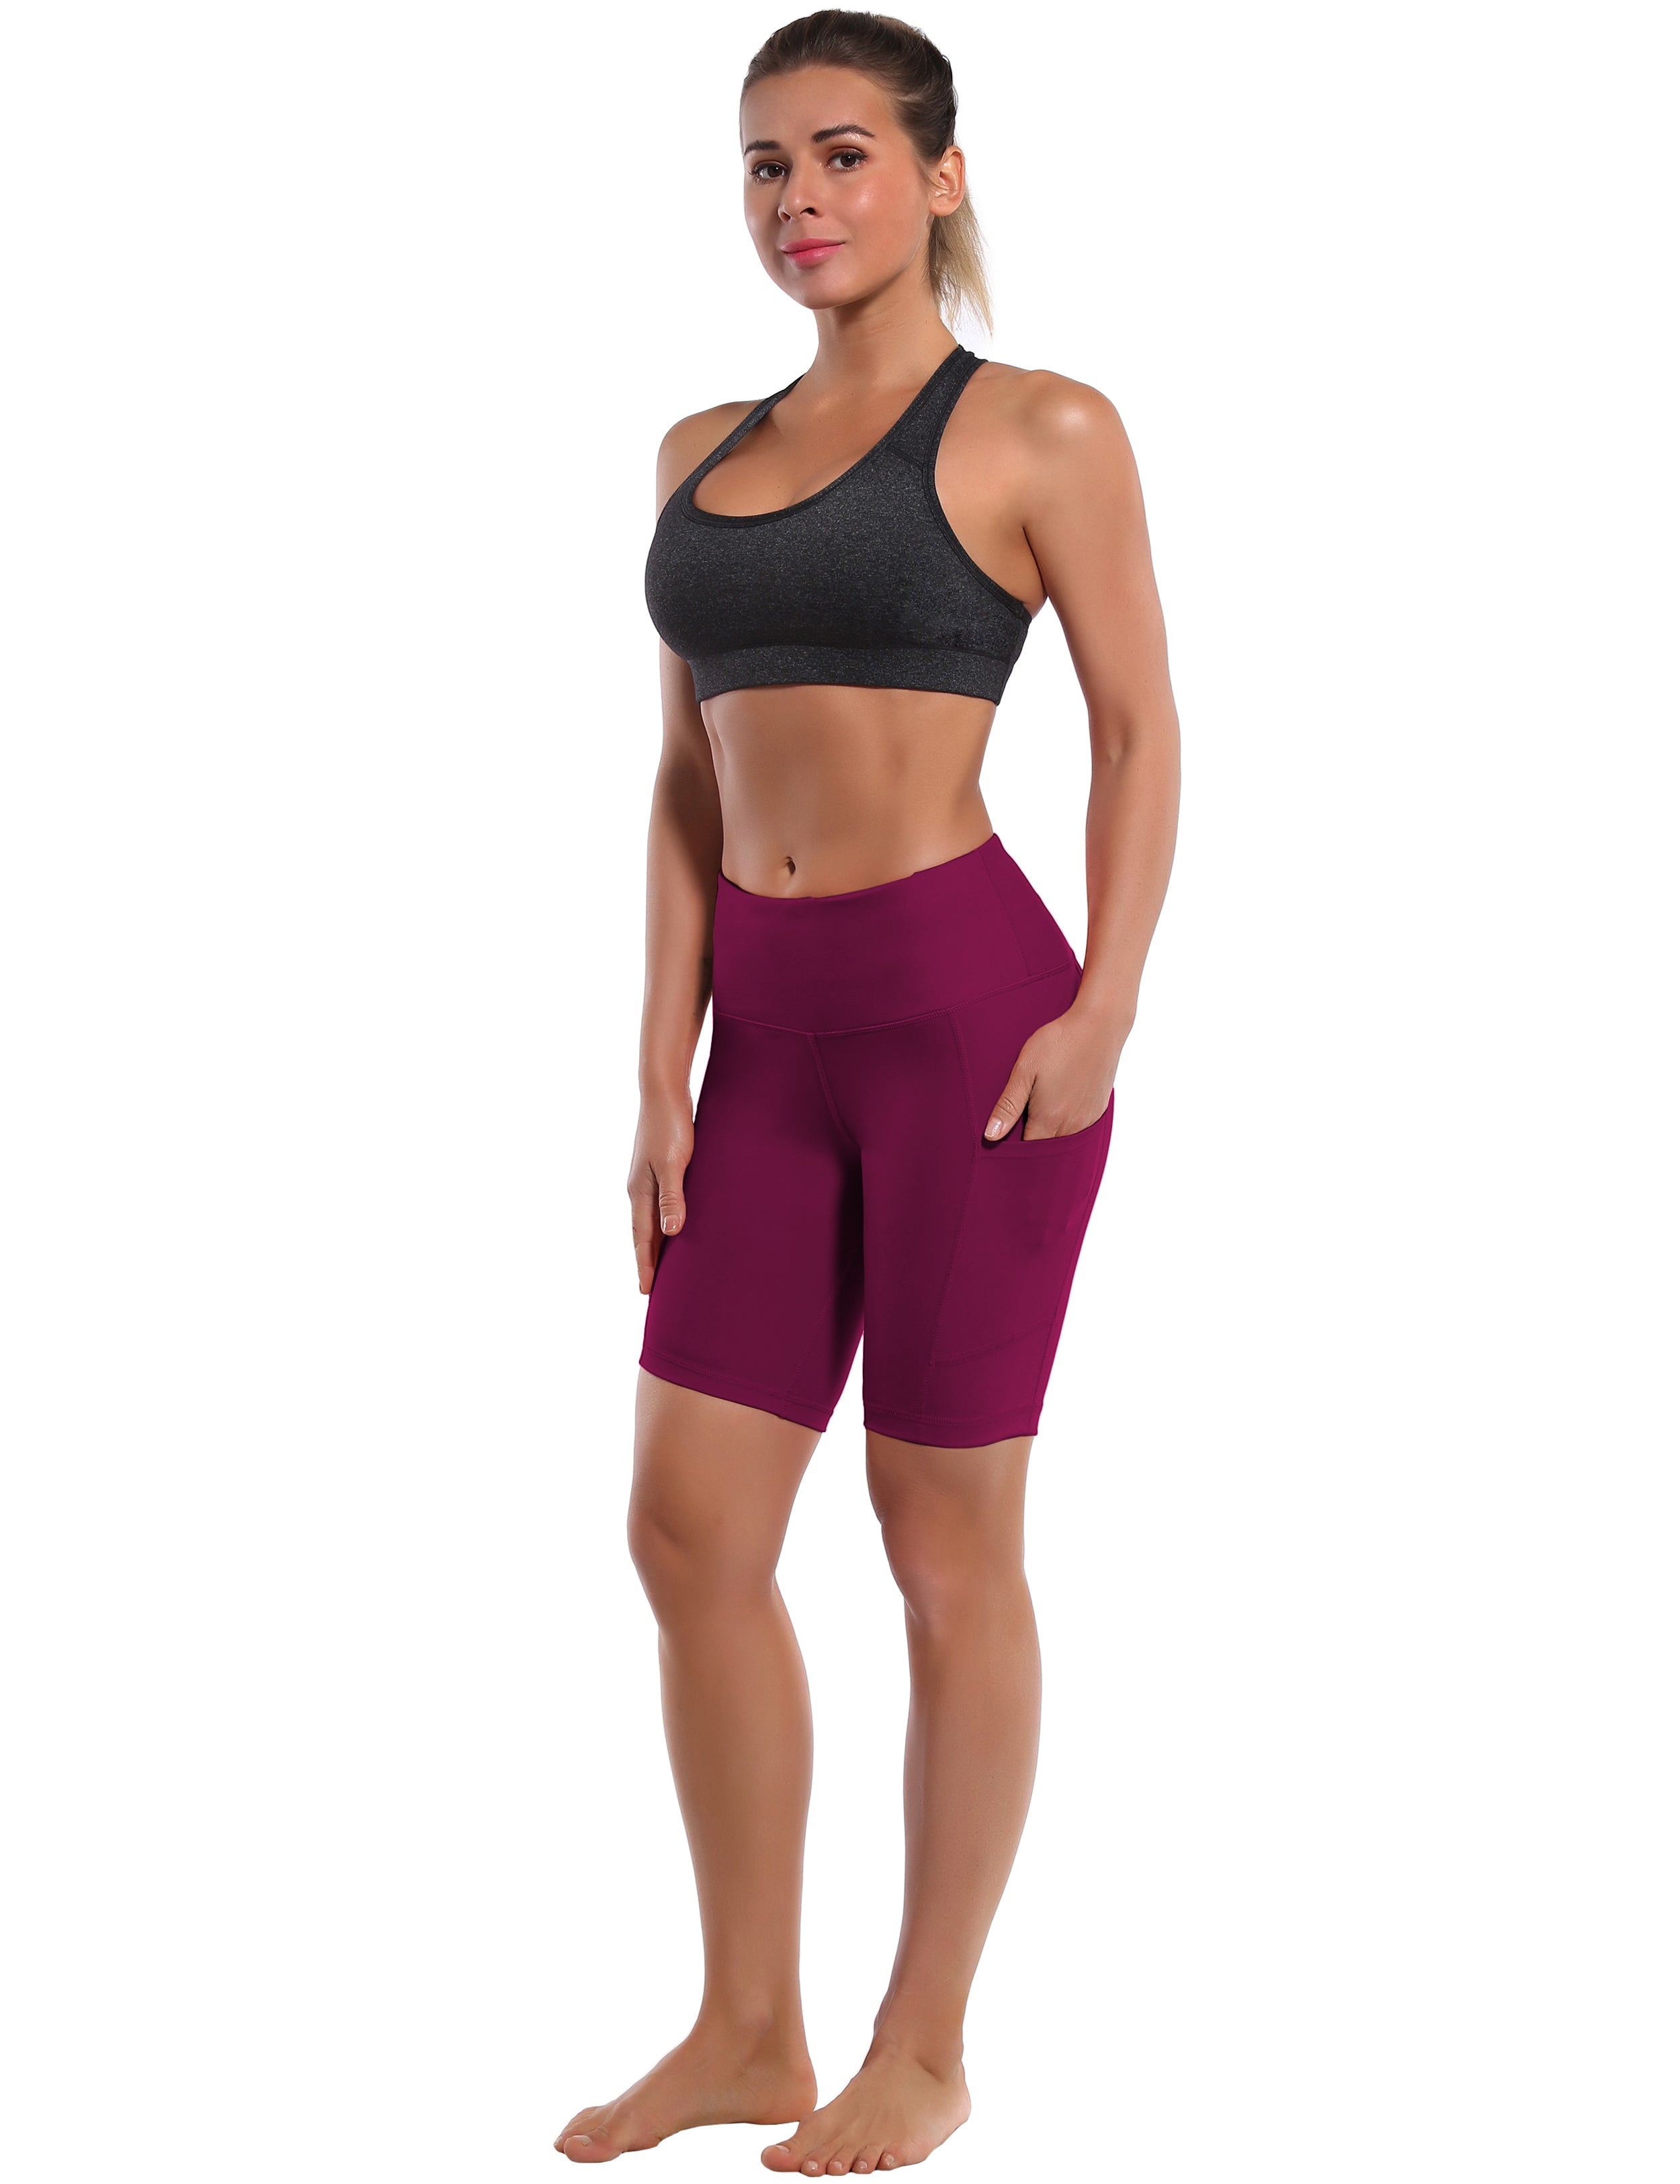 8" Side Pockets yogastudio Shorts grapevine Sleek, soft, smooth and totally comfortable: our newest style is here. Softest-ever fabric High elasticity High density 4-way stretch Fabric doesn't attract lint easily No see-through Moisture-wicking Machine wash 75% Nylon, 25% Spandex